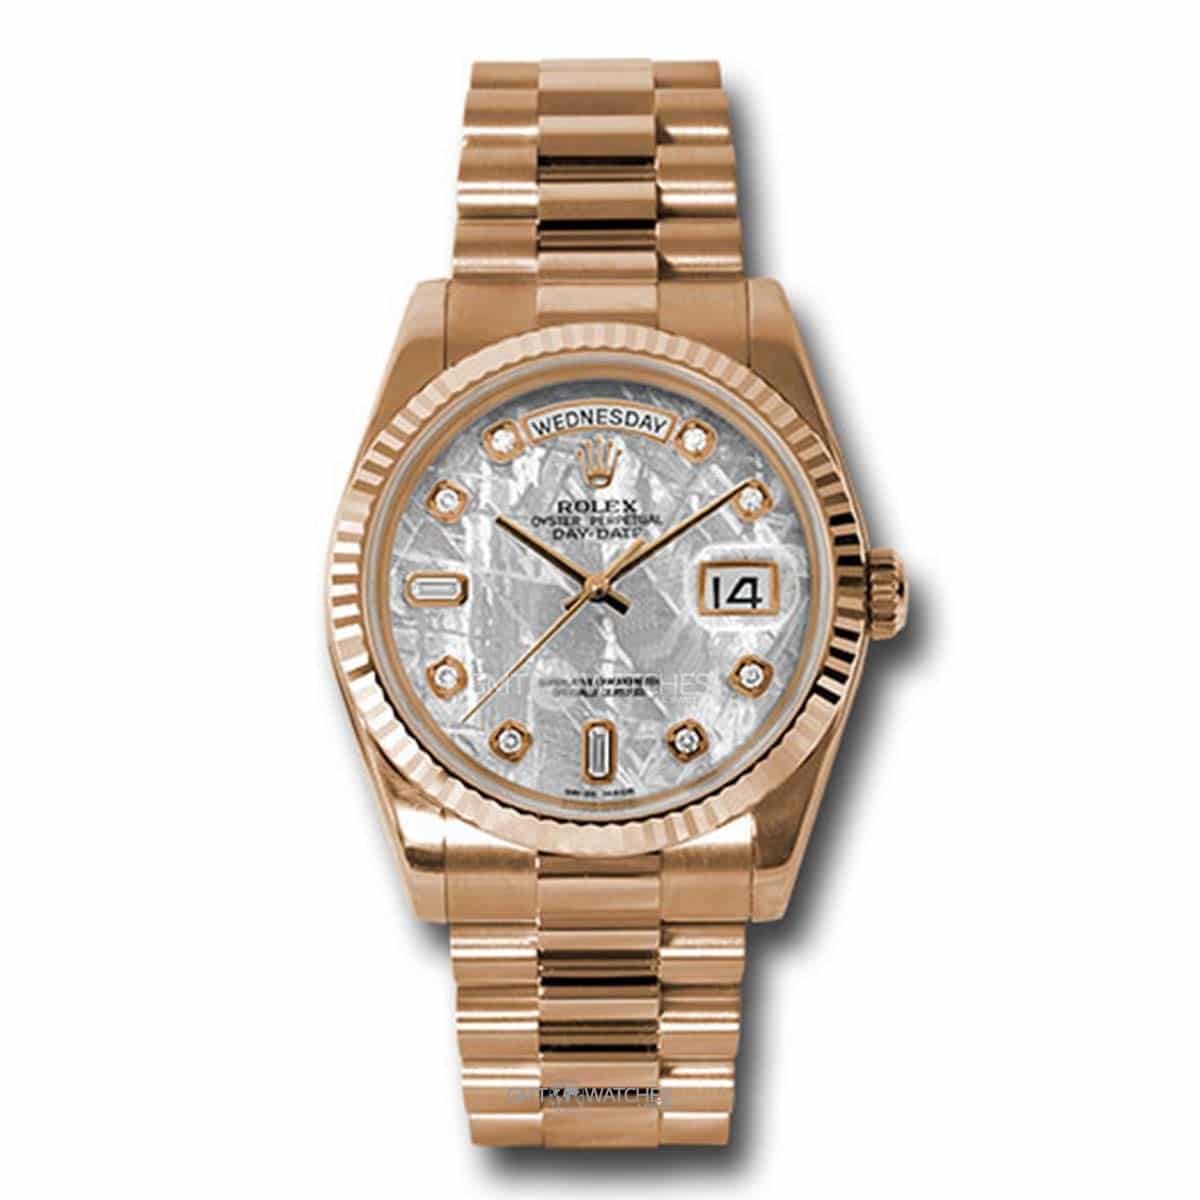 Rolex Oyster Perpetual Day-Date 36mm 18k Rose Gold Fluted Bezel 118235 mtdp